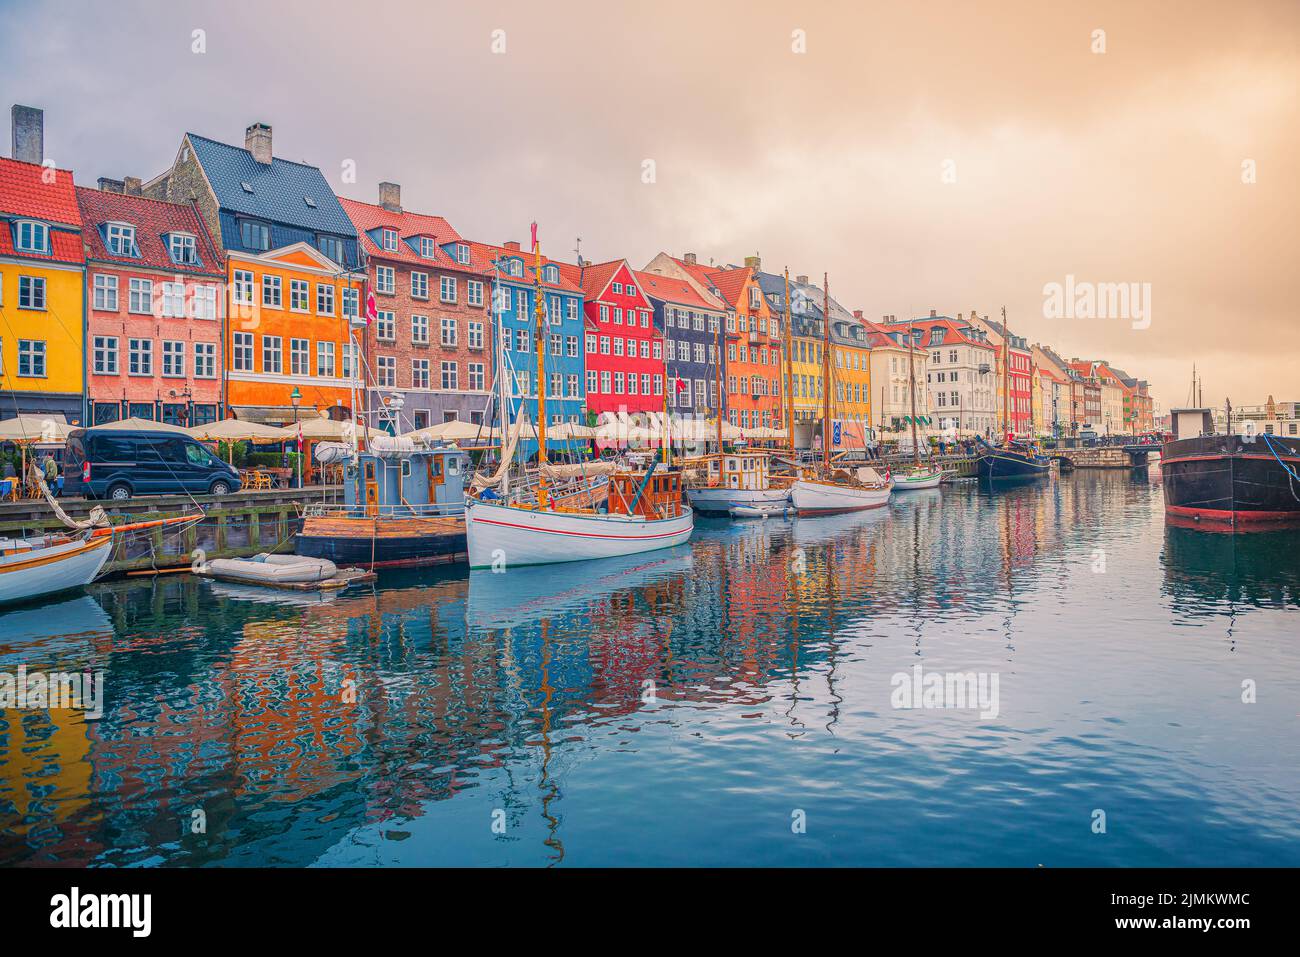 The most popular place of the city the Nyhavn canal with a pier with many boats, yachts and ships, located near the old beautifu Stock Photo